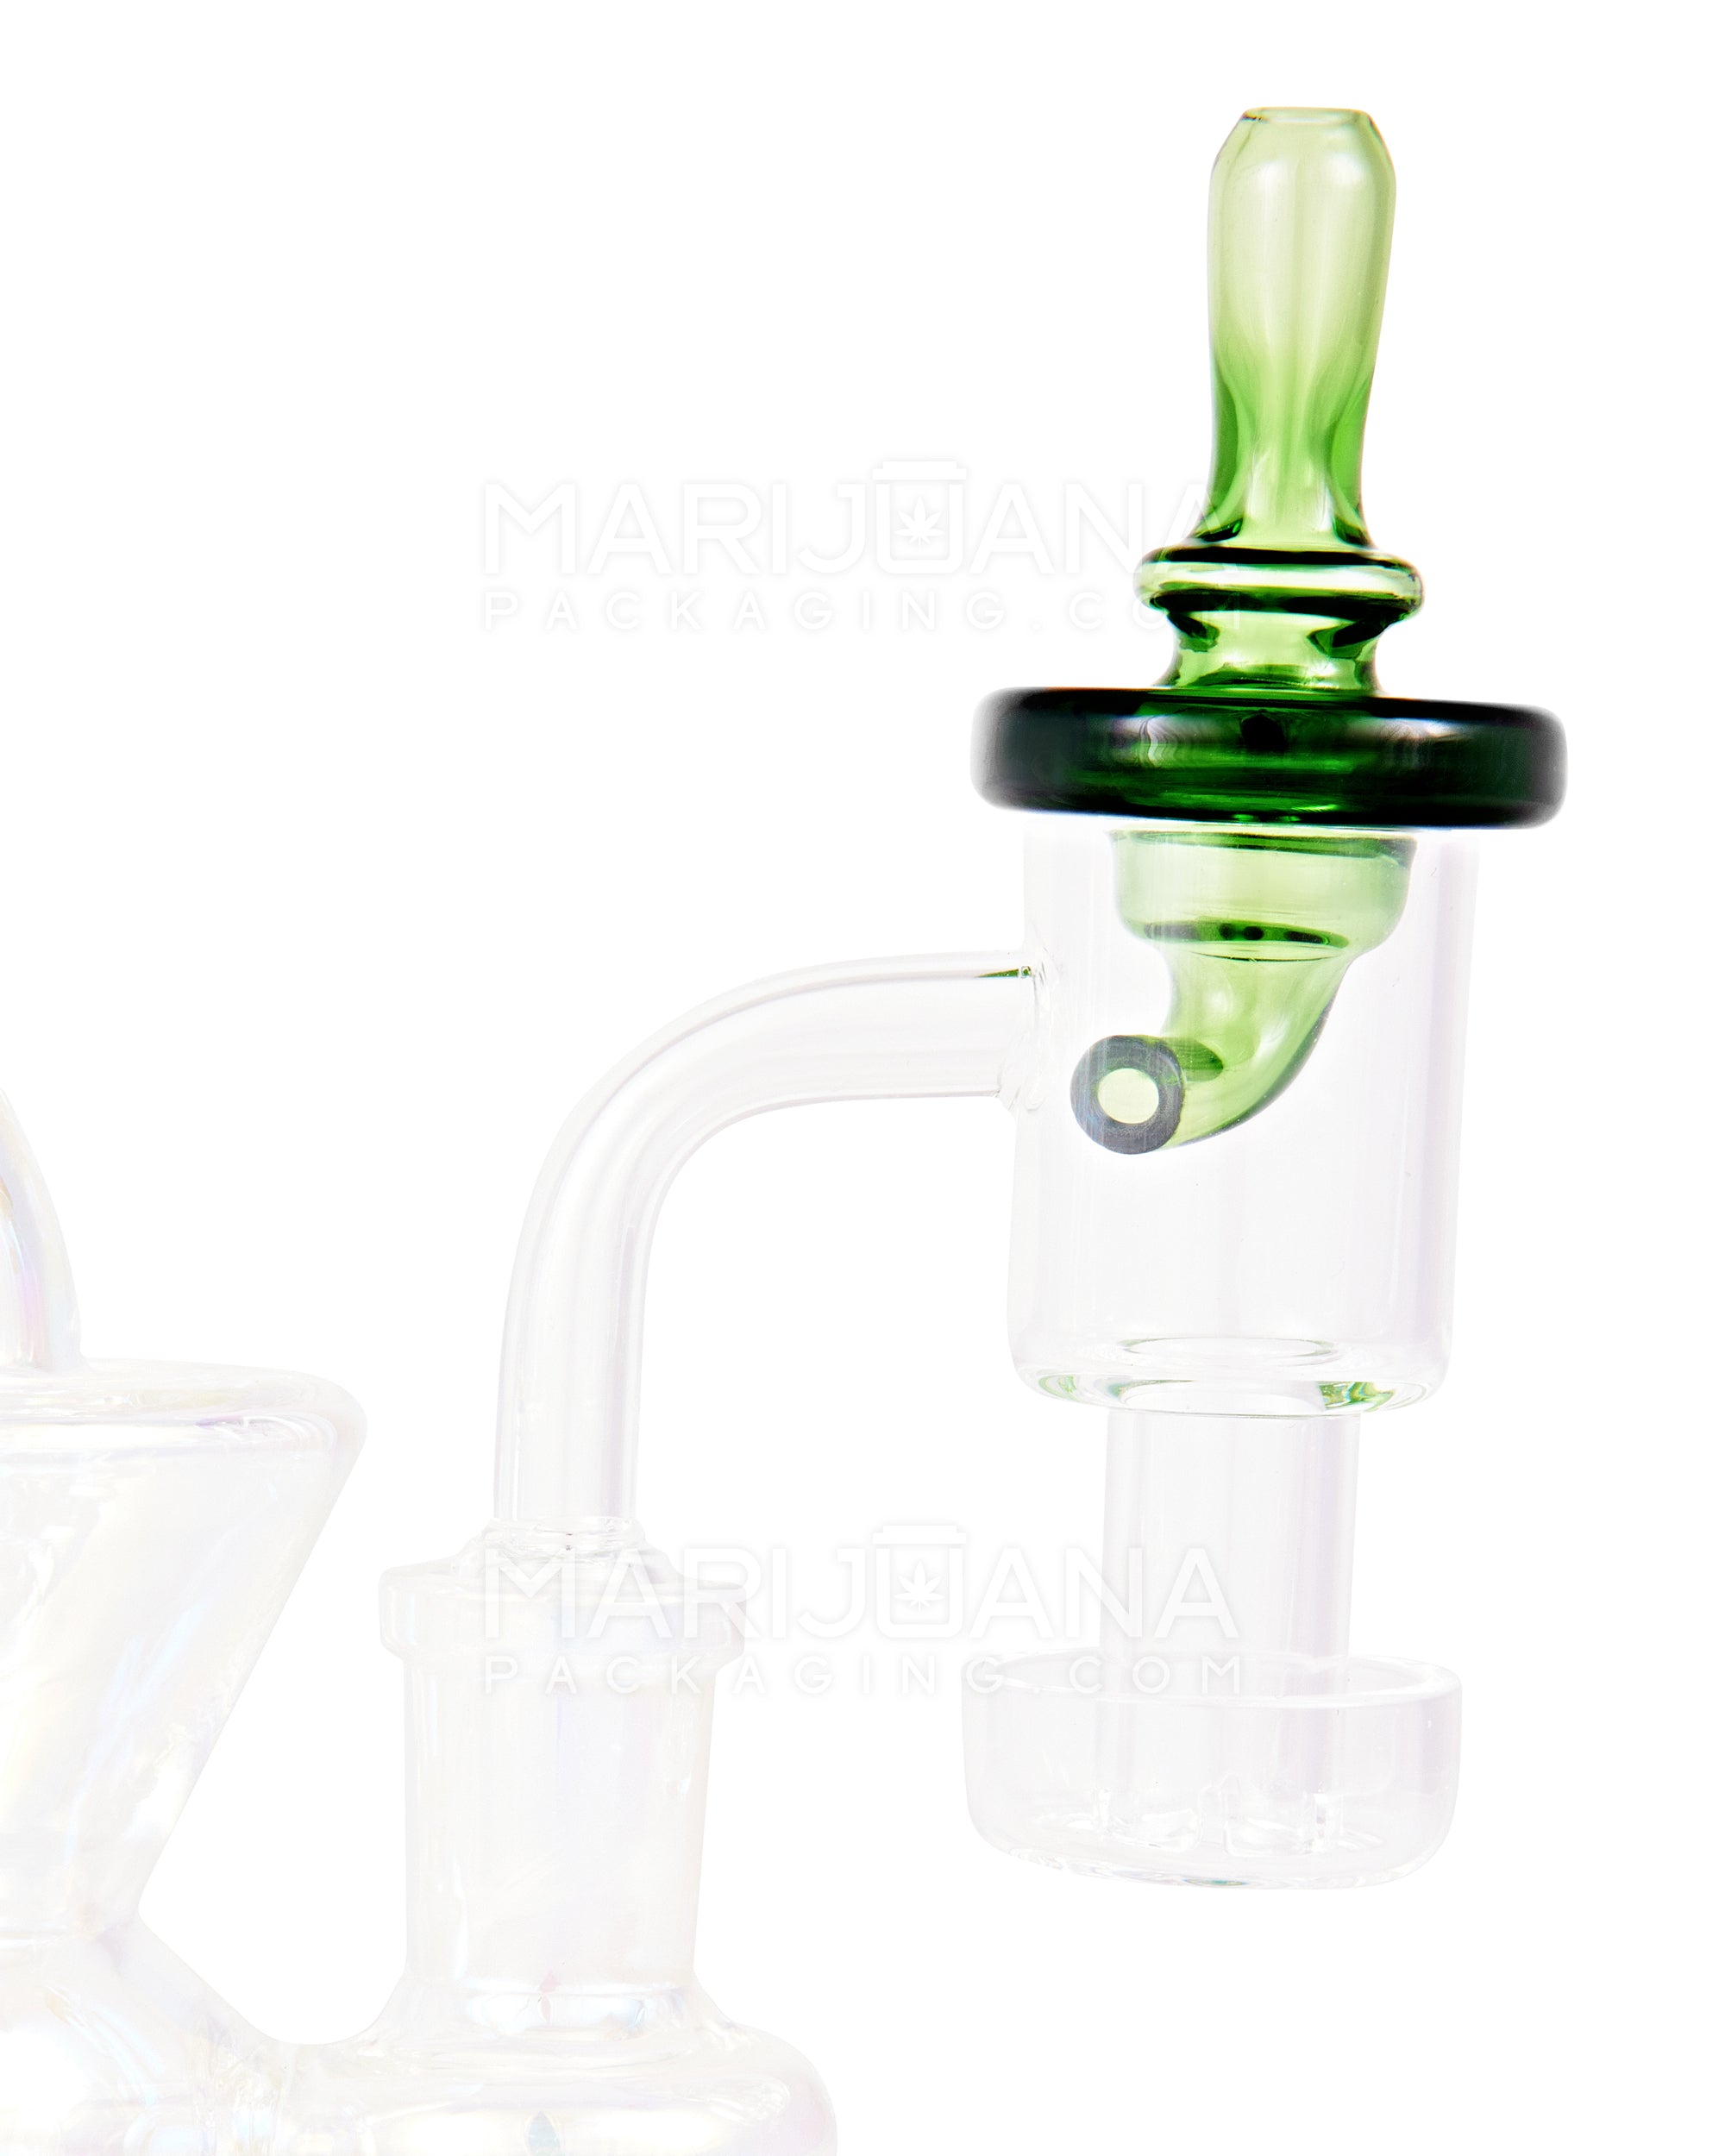 Ringed Directional Flat Carb Cap | 30mm - Glass - Assorted - 14